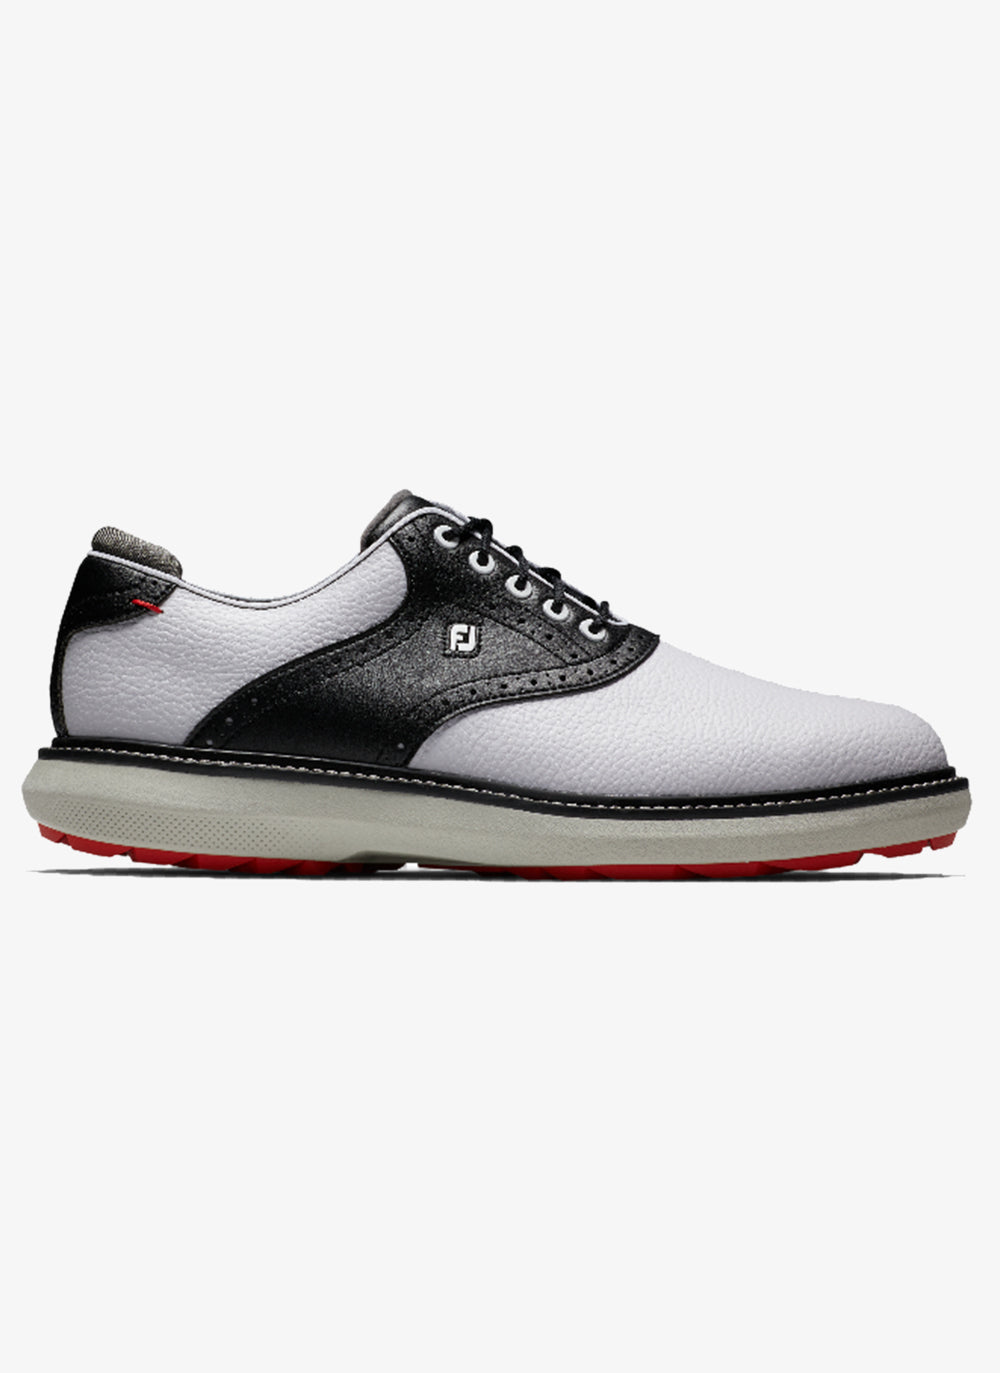 FootJoy Traditions Golf Shoes 57924